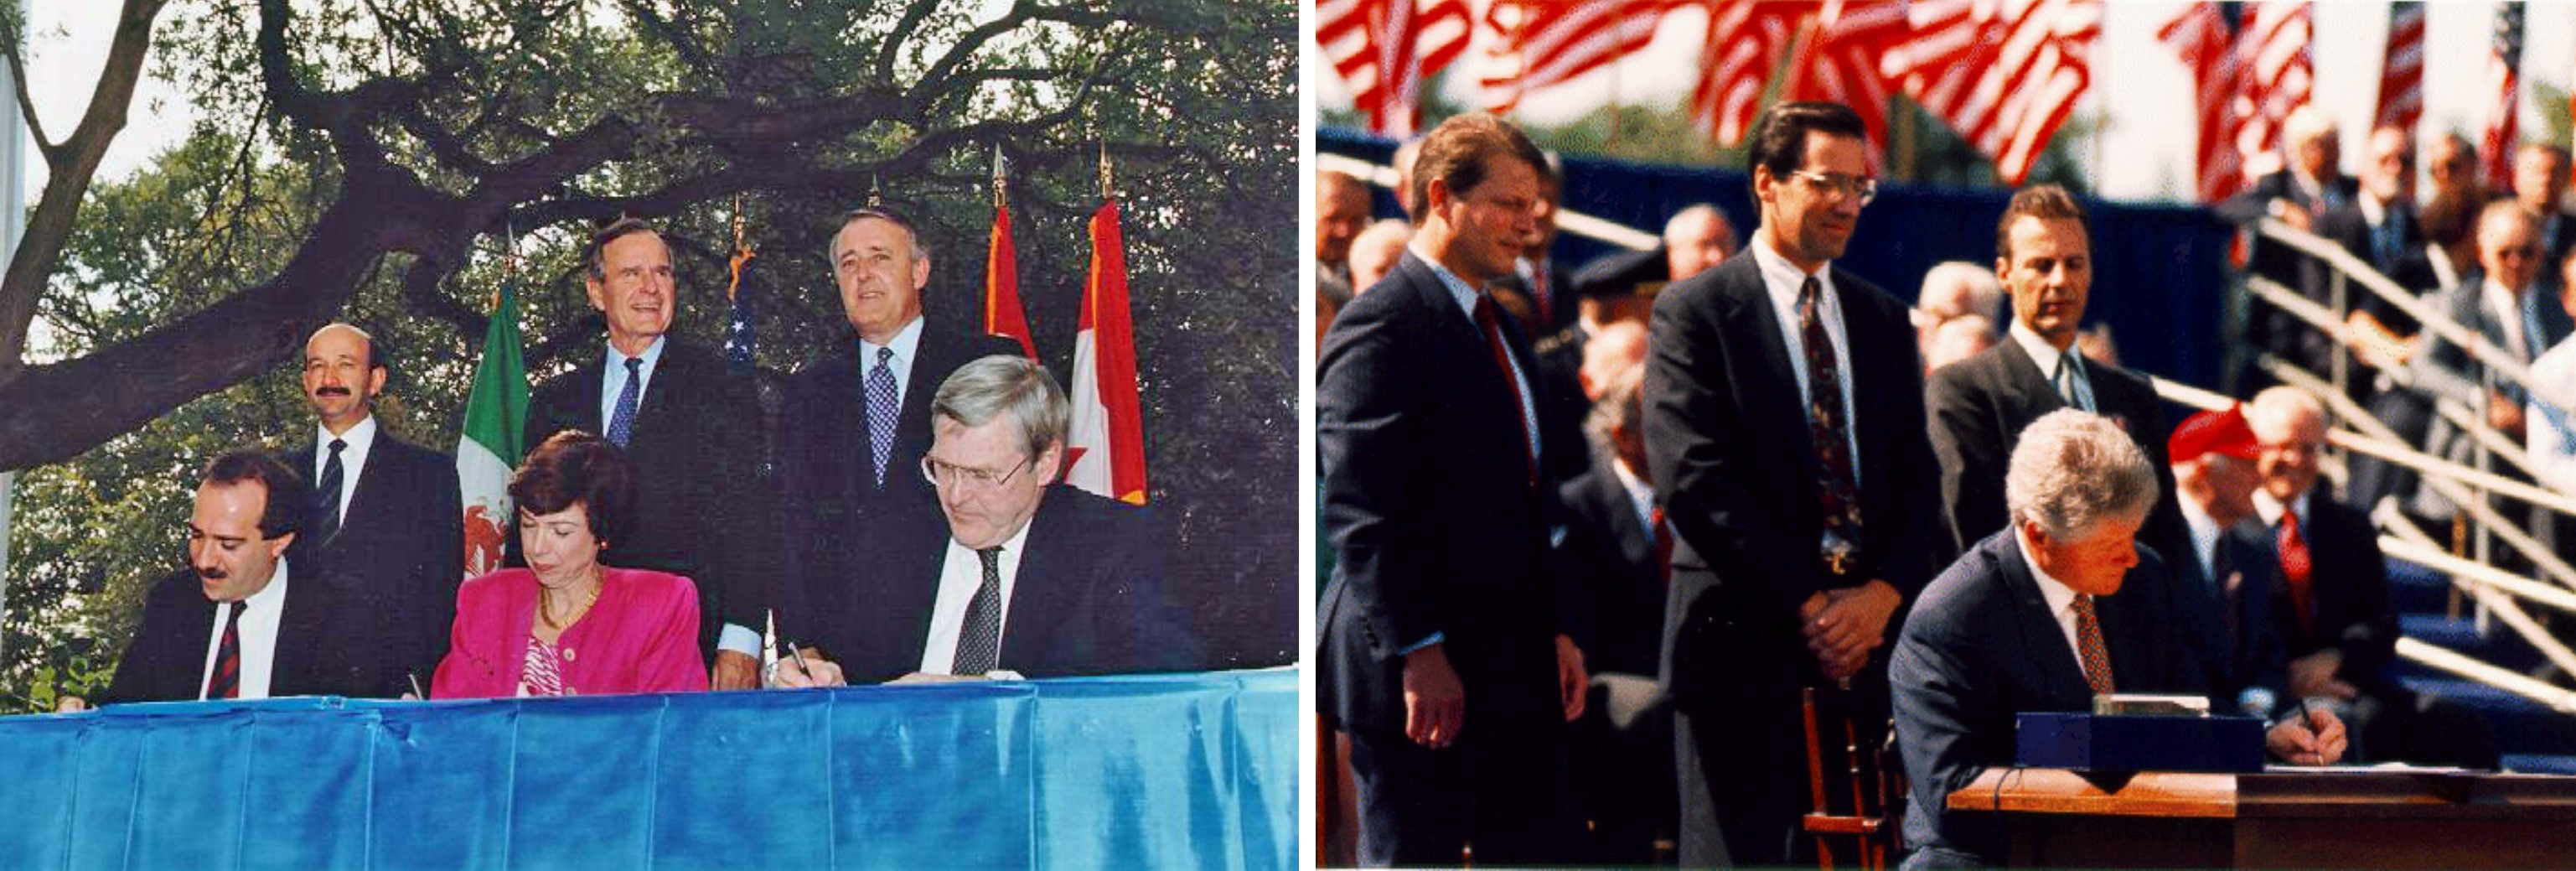 On the left, signing of the draft of the North American Free Trade Agreement. On the right,  President Bill Clinton signing NAFTA into law.